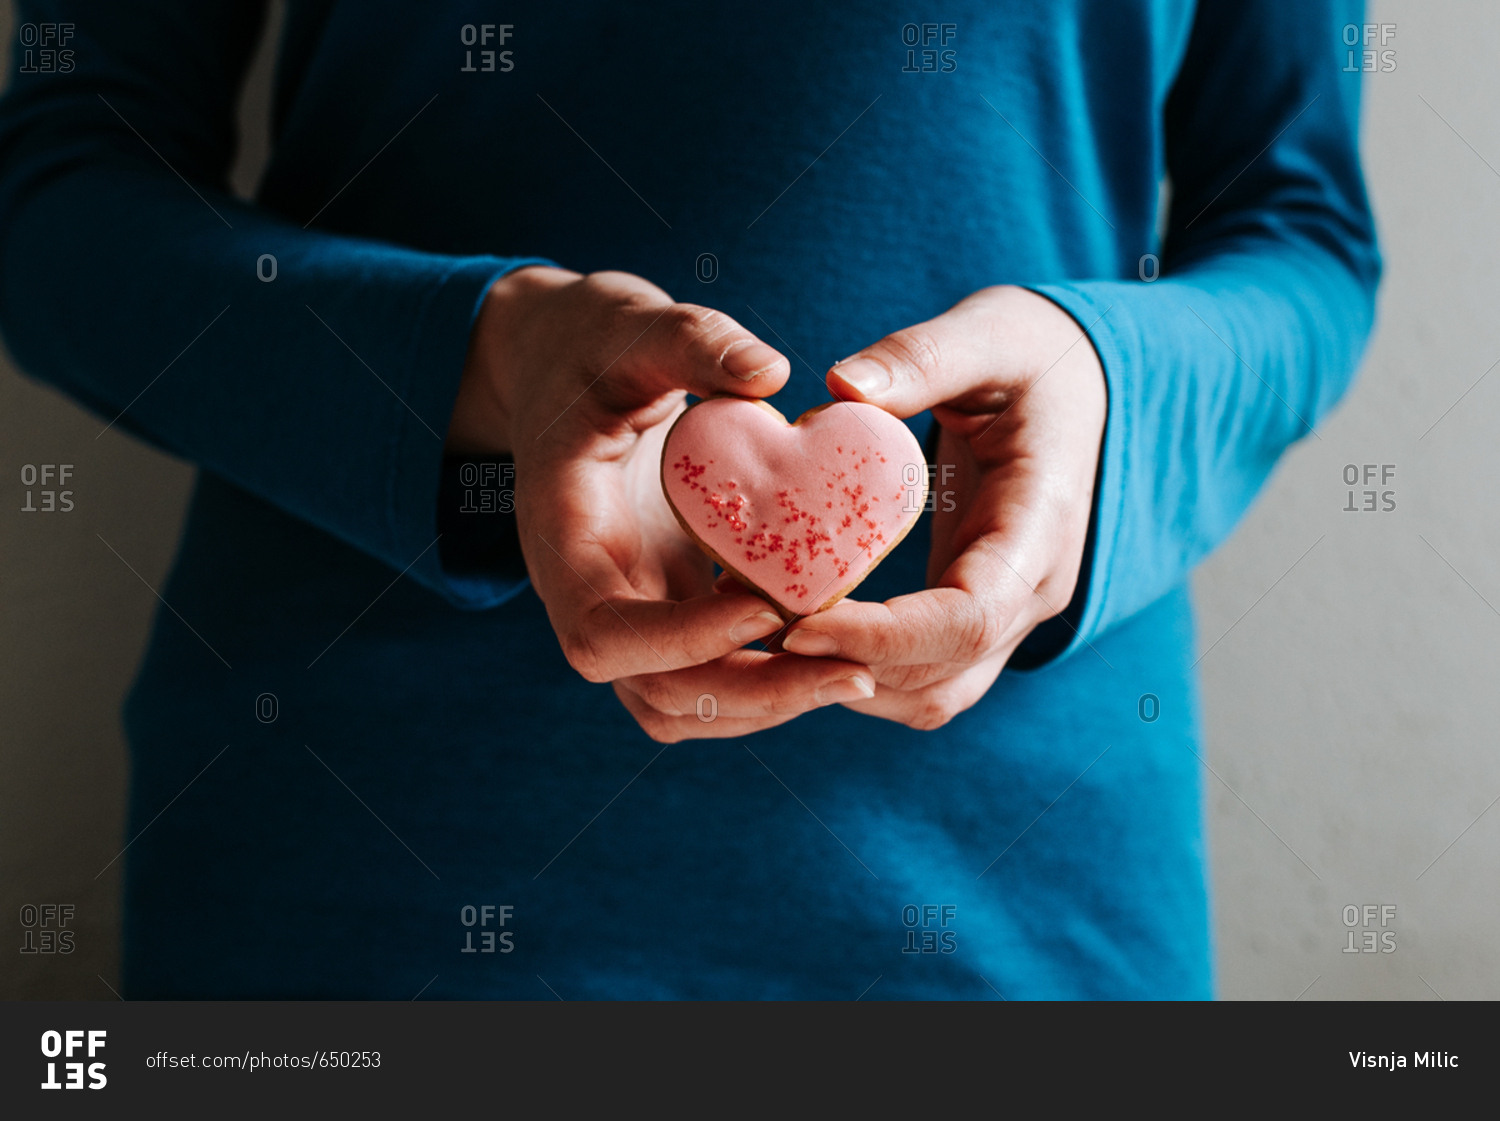 Hands holding pink heart-shaped gingerbread cookie